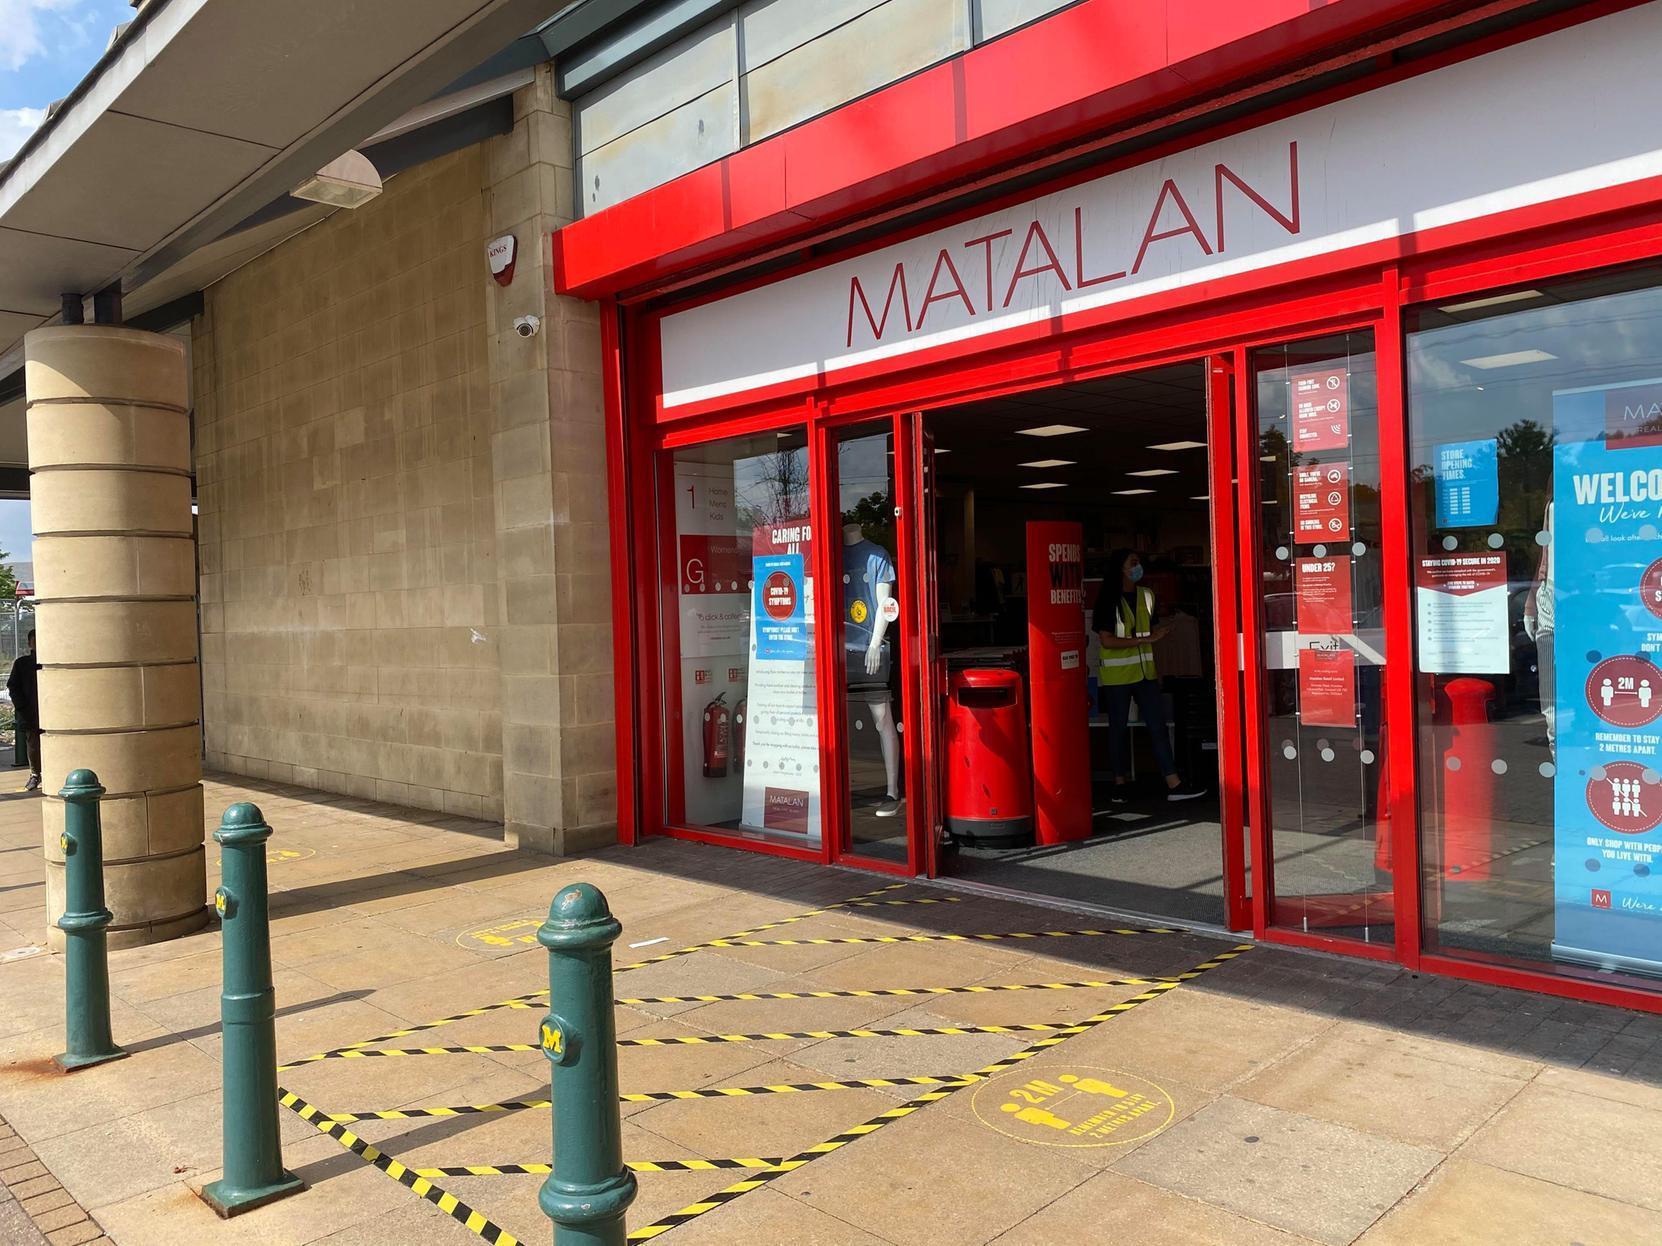 These Matalan stores are now open in Leeds ahead of non-essential shops